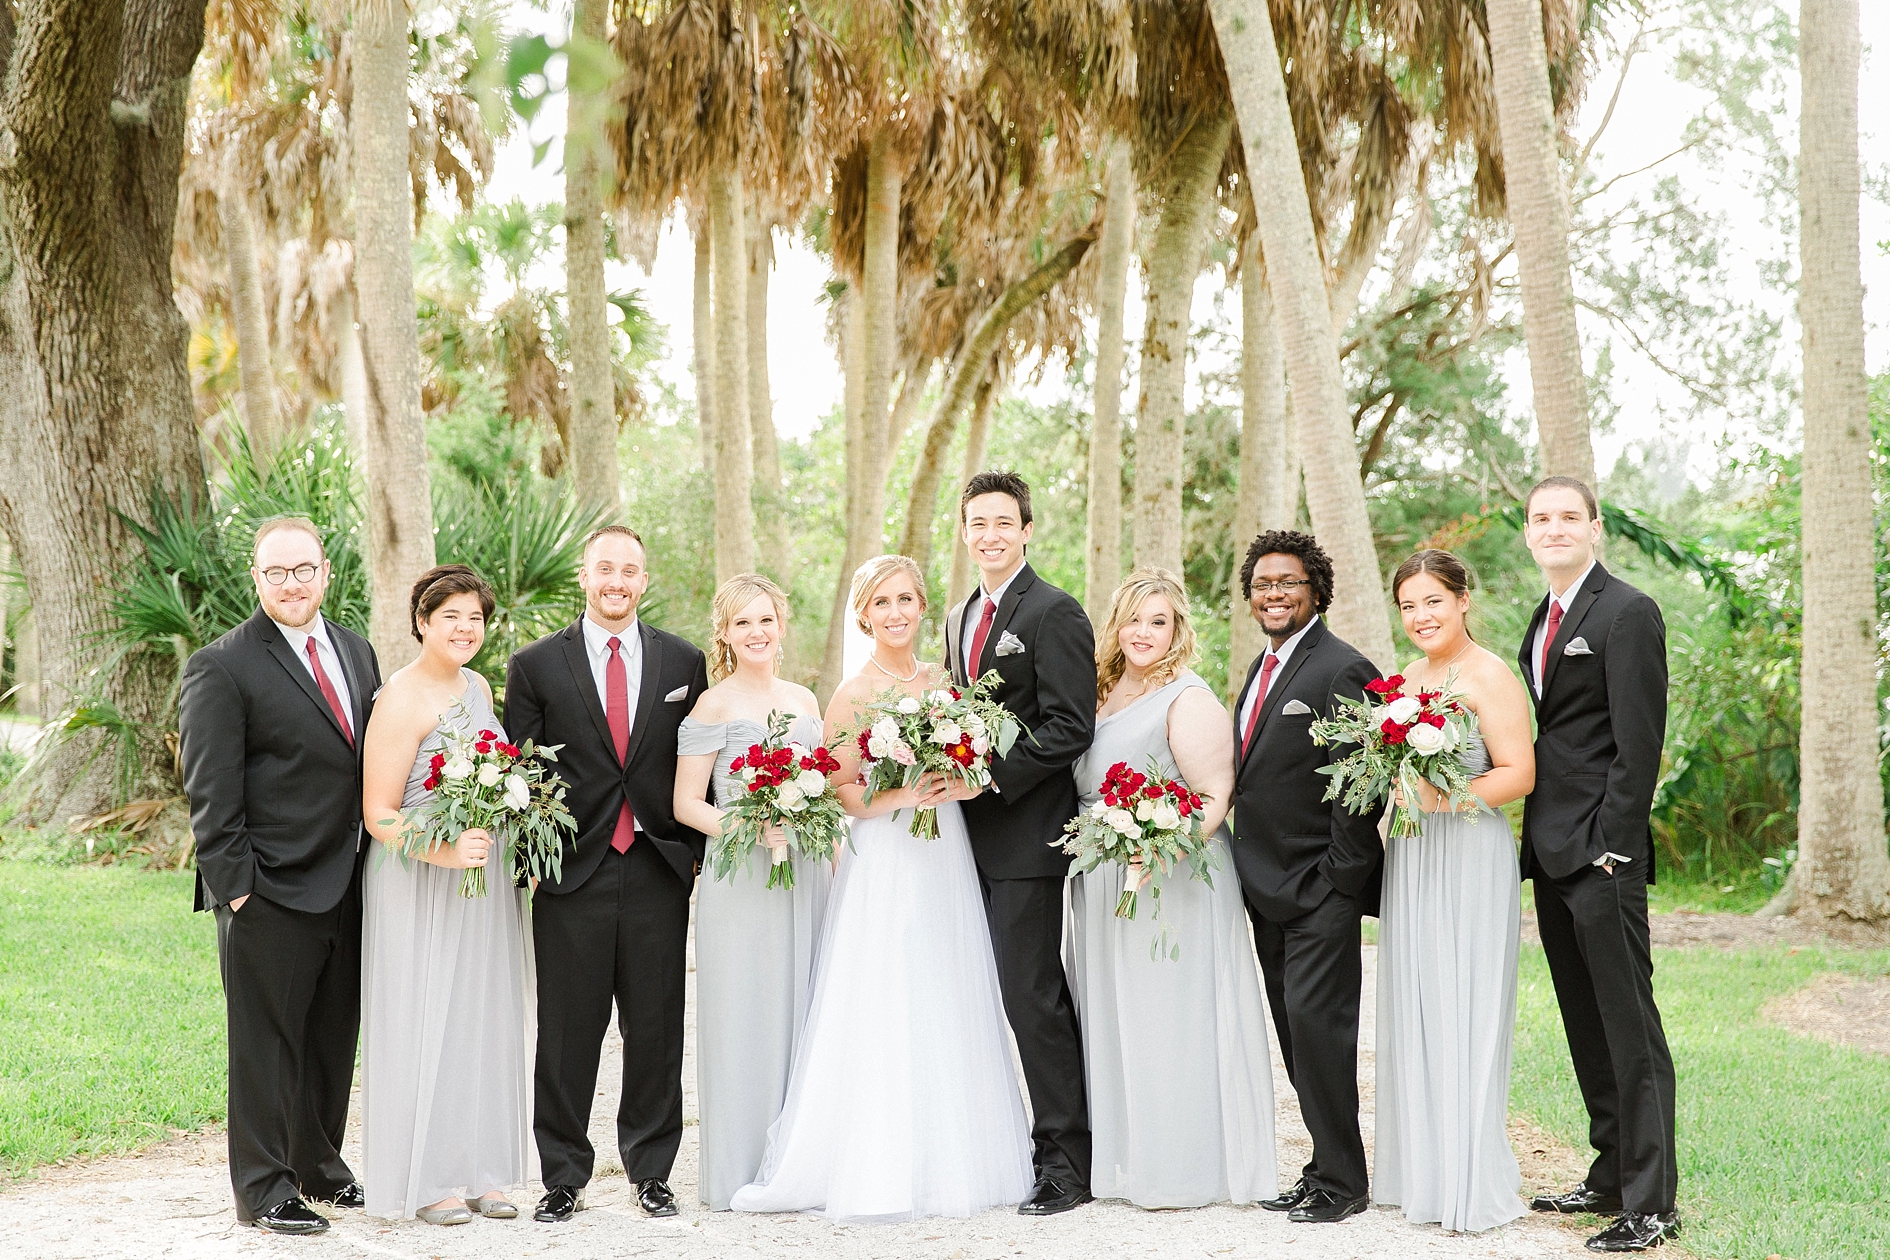 Edson Keith Mansion Wedding | © Ailyn La Torre Photography 2015